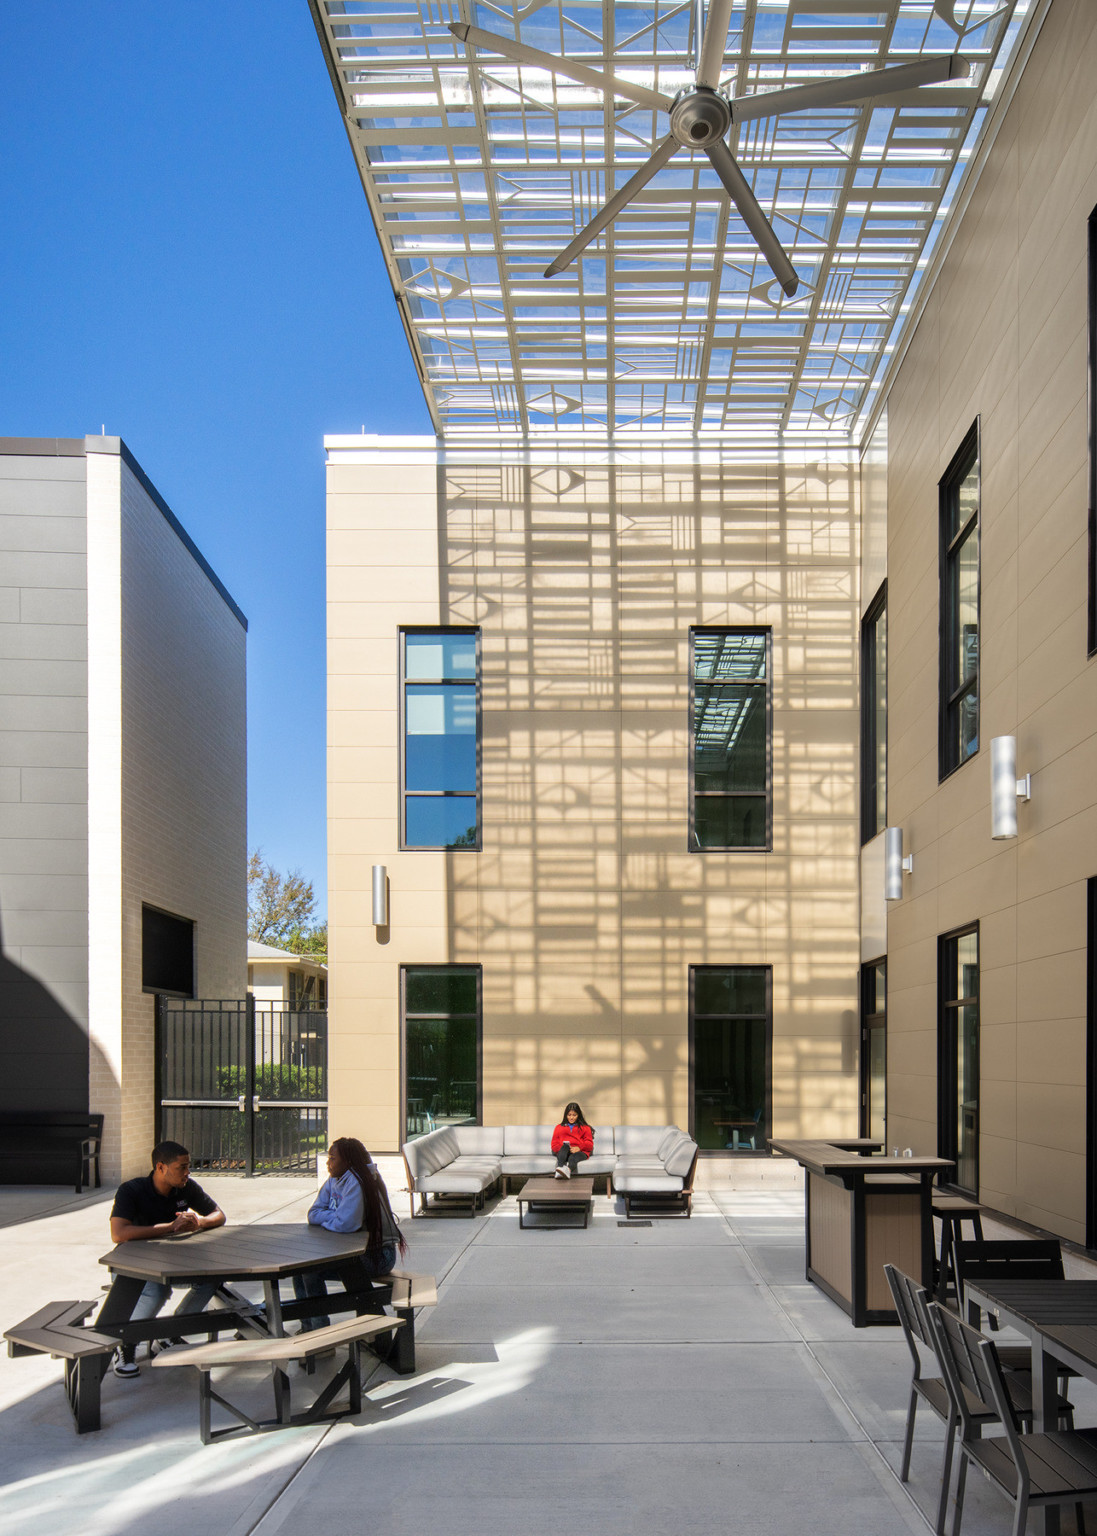 A courtyard between the 2 buildings with seating areas. The partially translucent awning creates geometric shadows